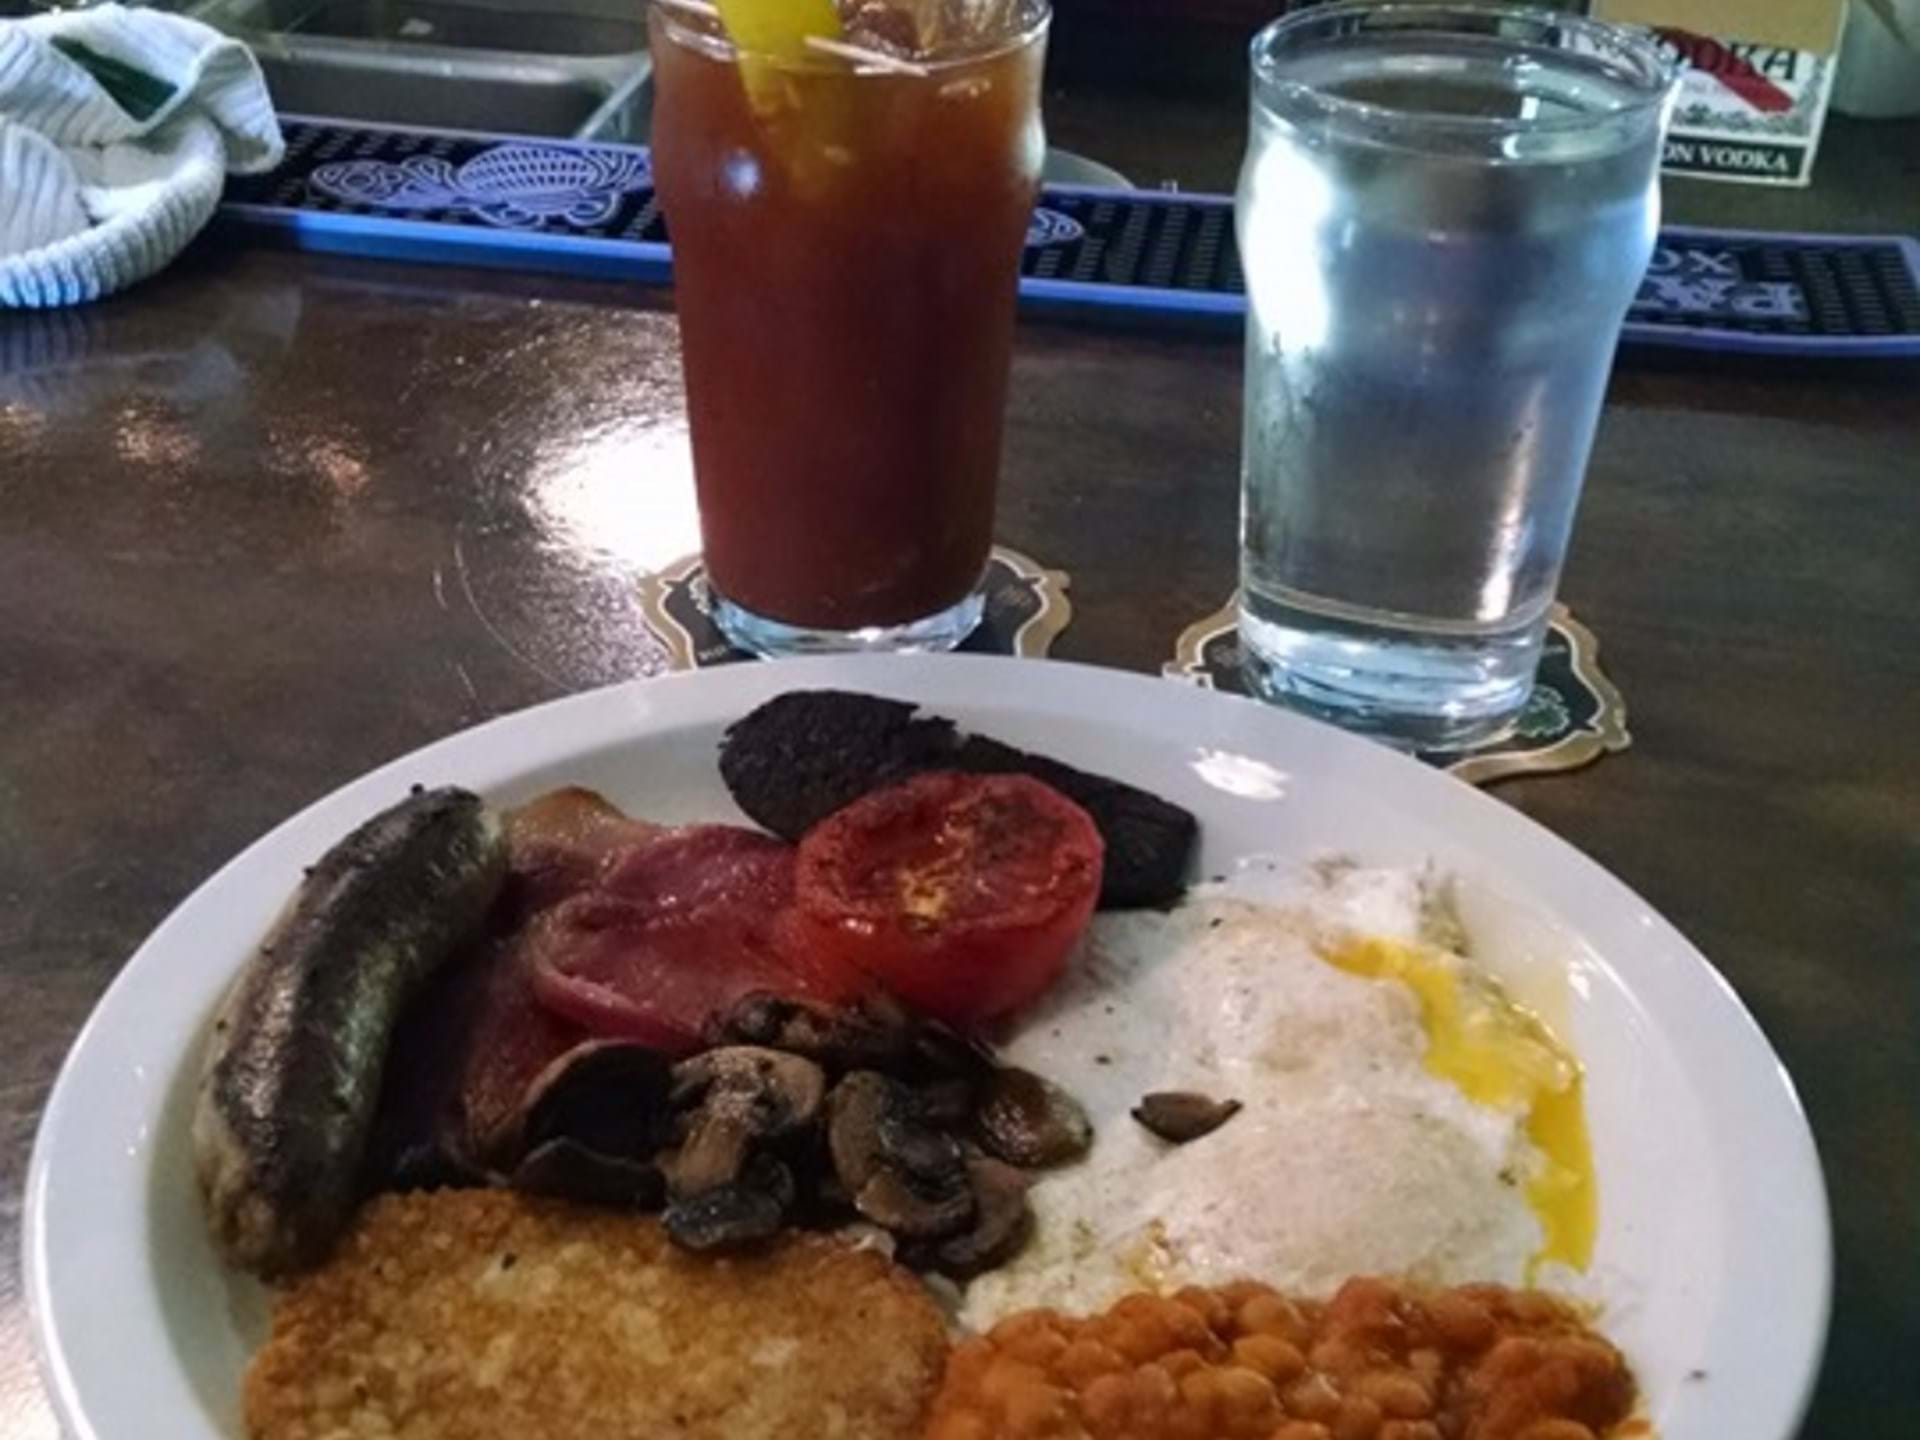 Full English Breakfast with a Bloody Mary - served Saturday and Sunday mornings between 8 am and 10 am.